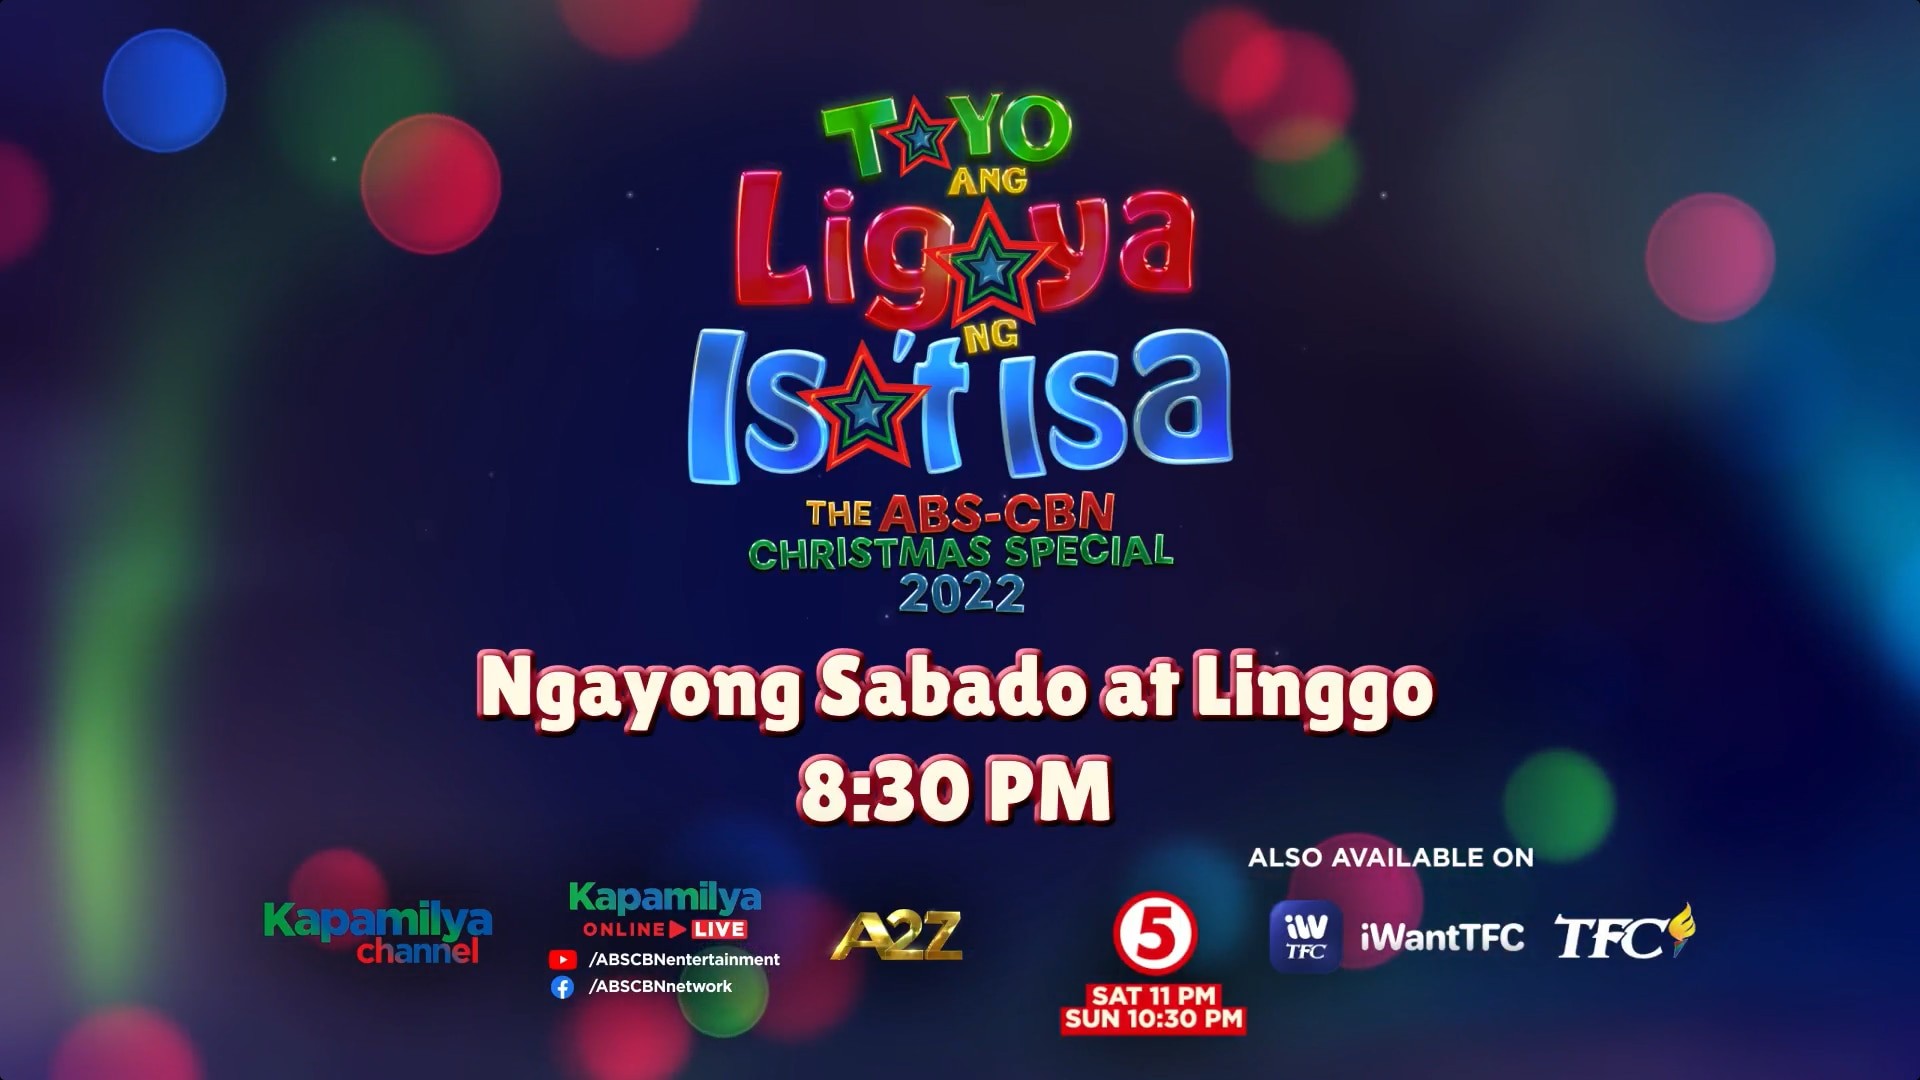 abs-cbn christmas special platforms